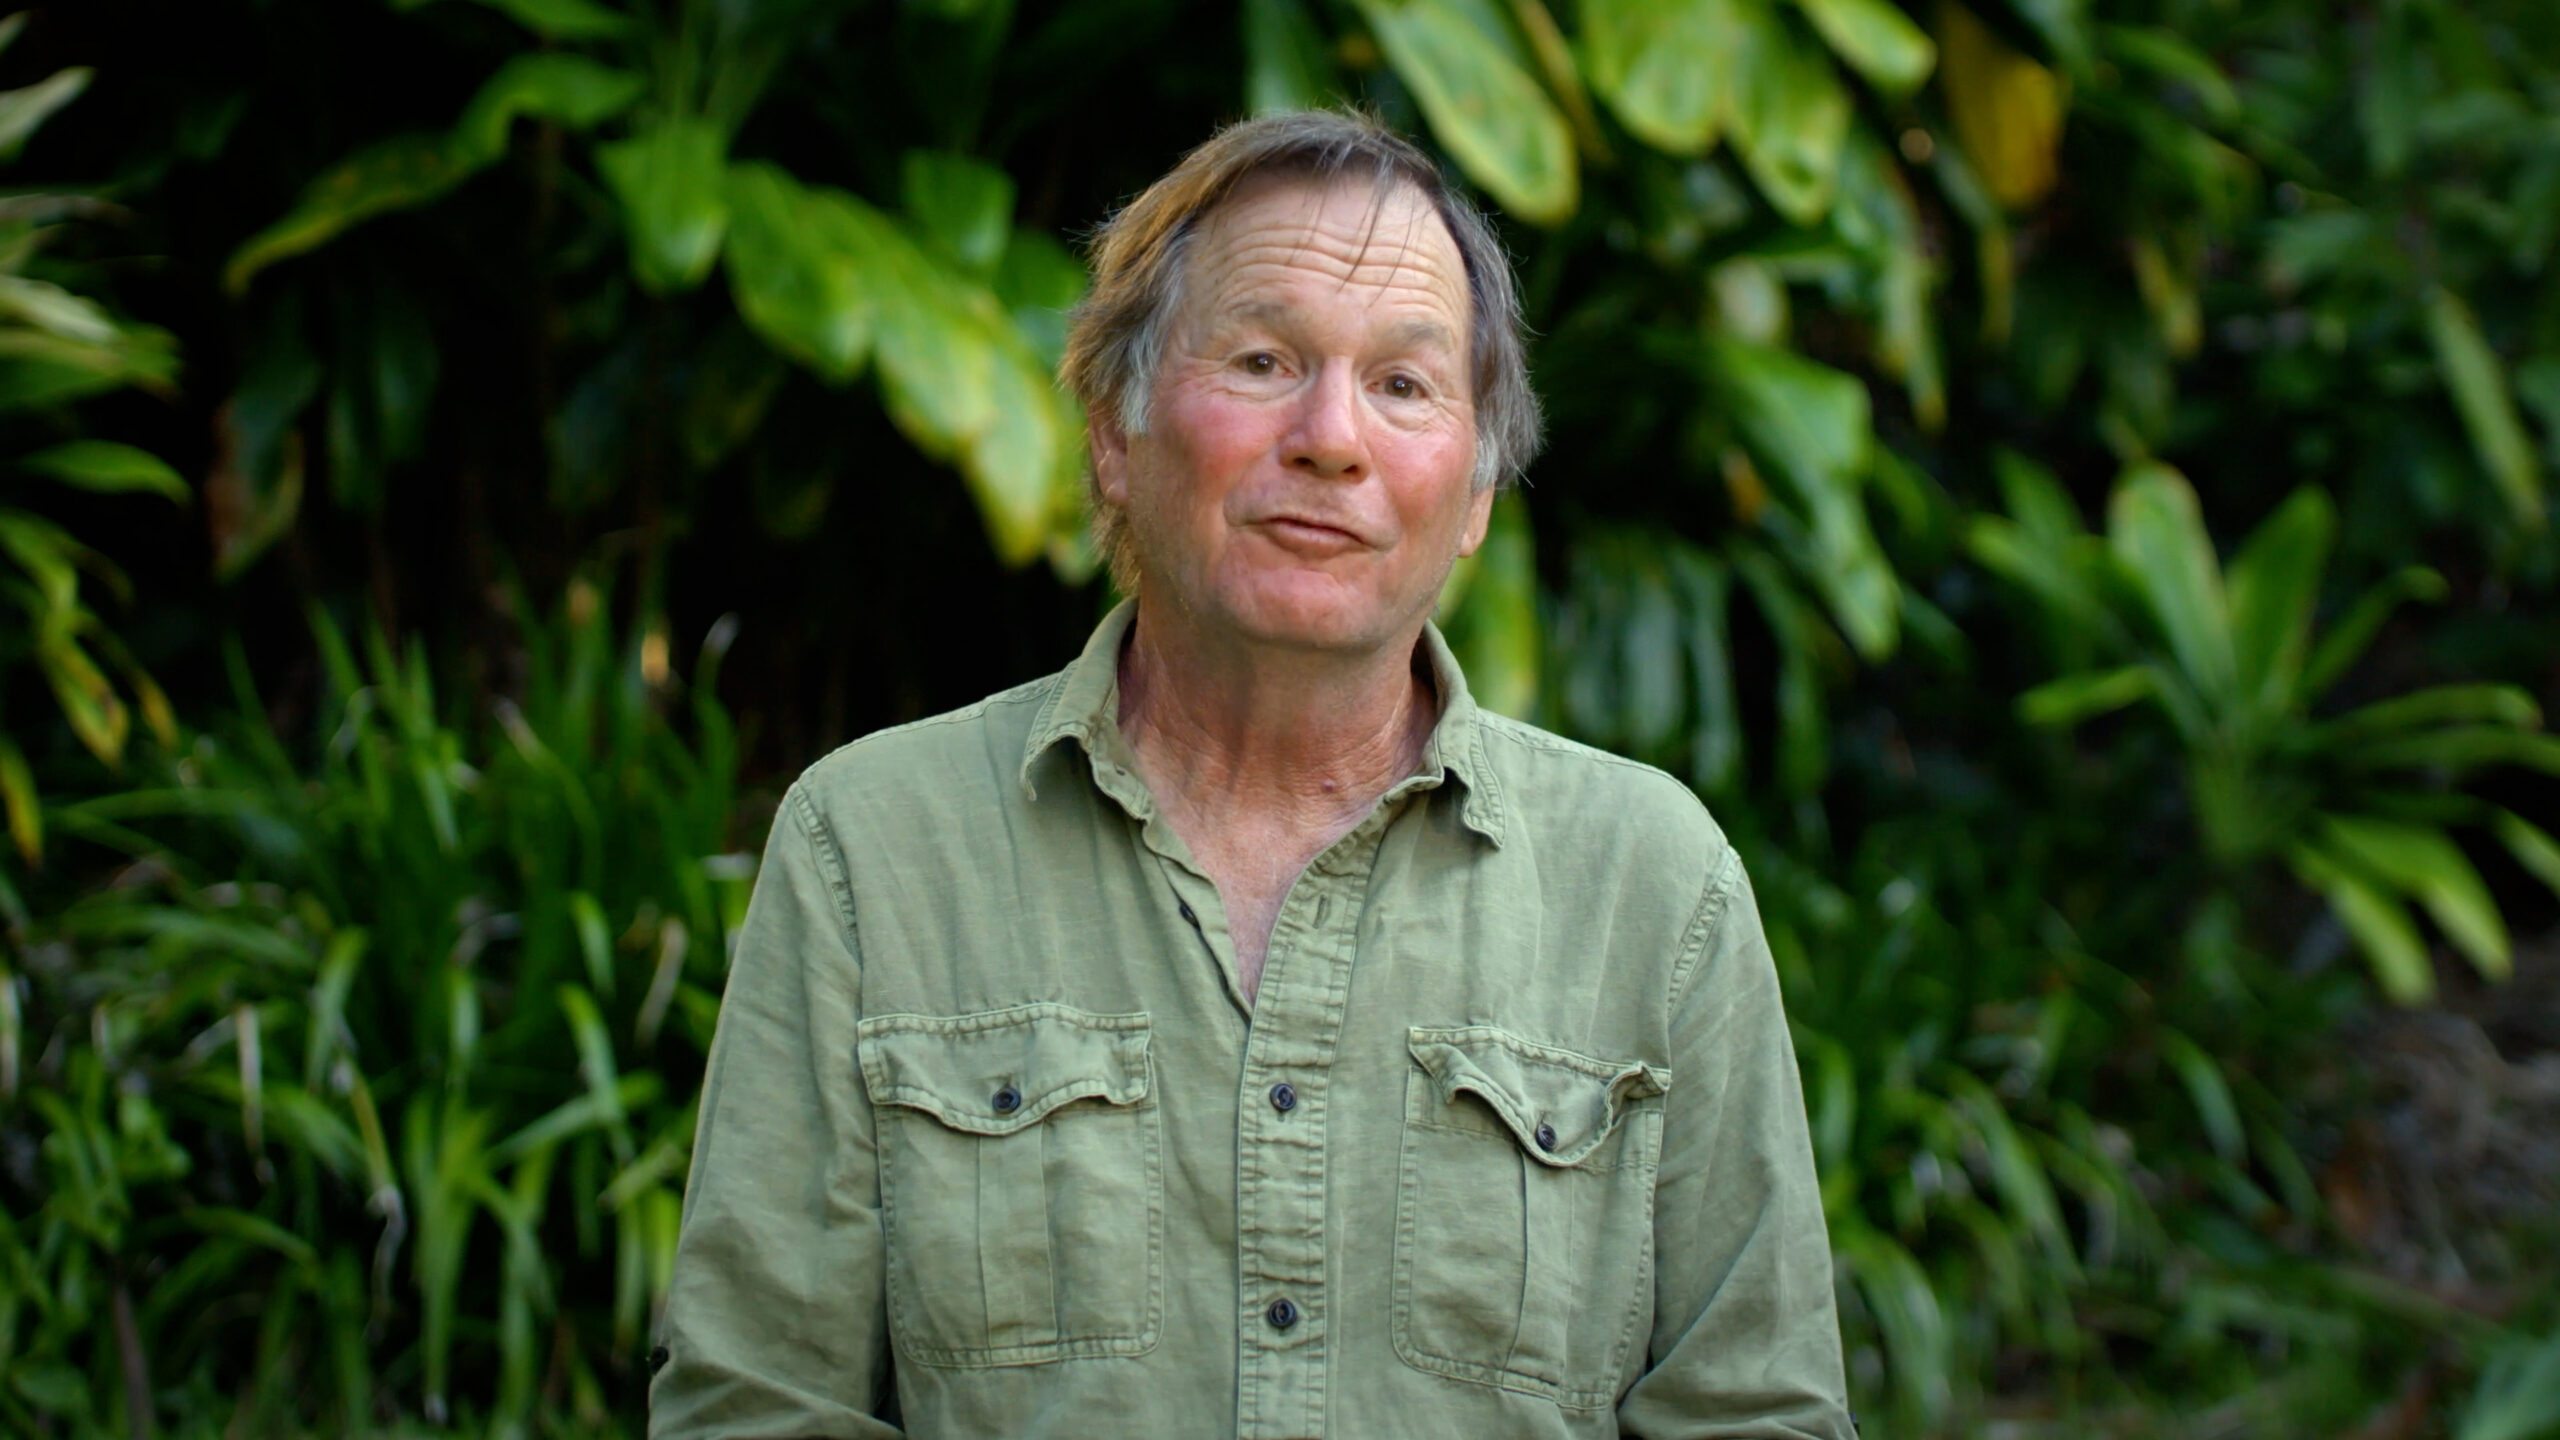 A man in a light green shirt with foliage in the background.